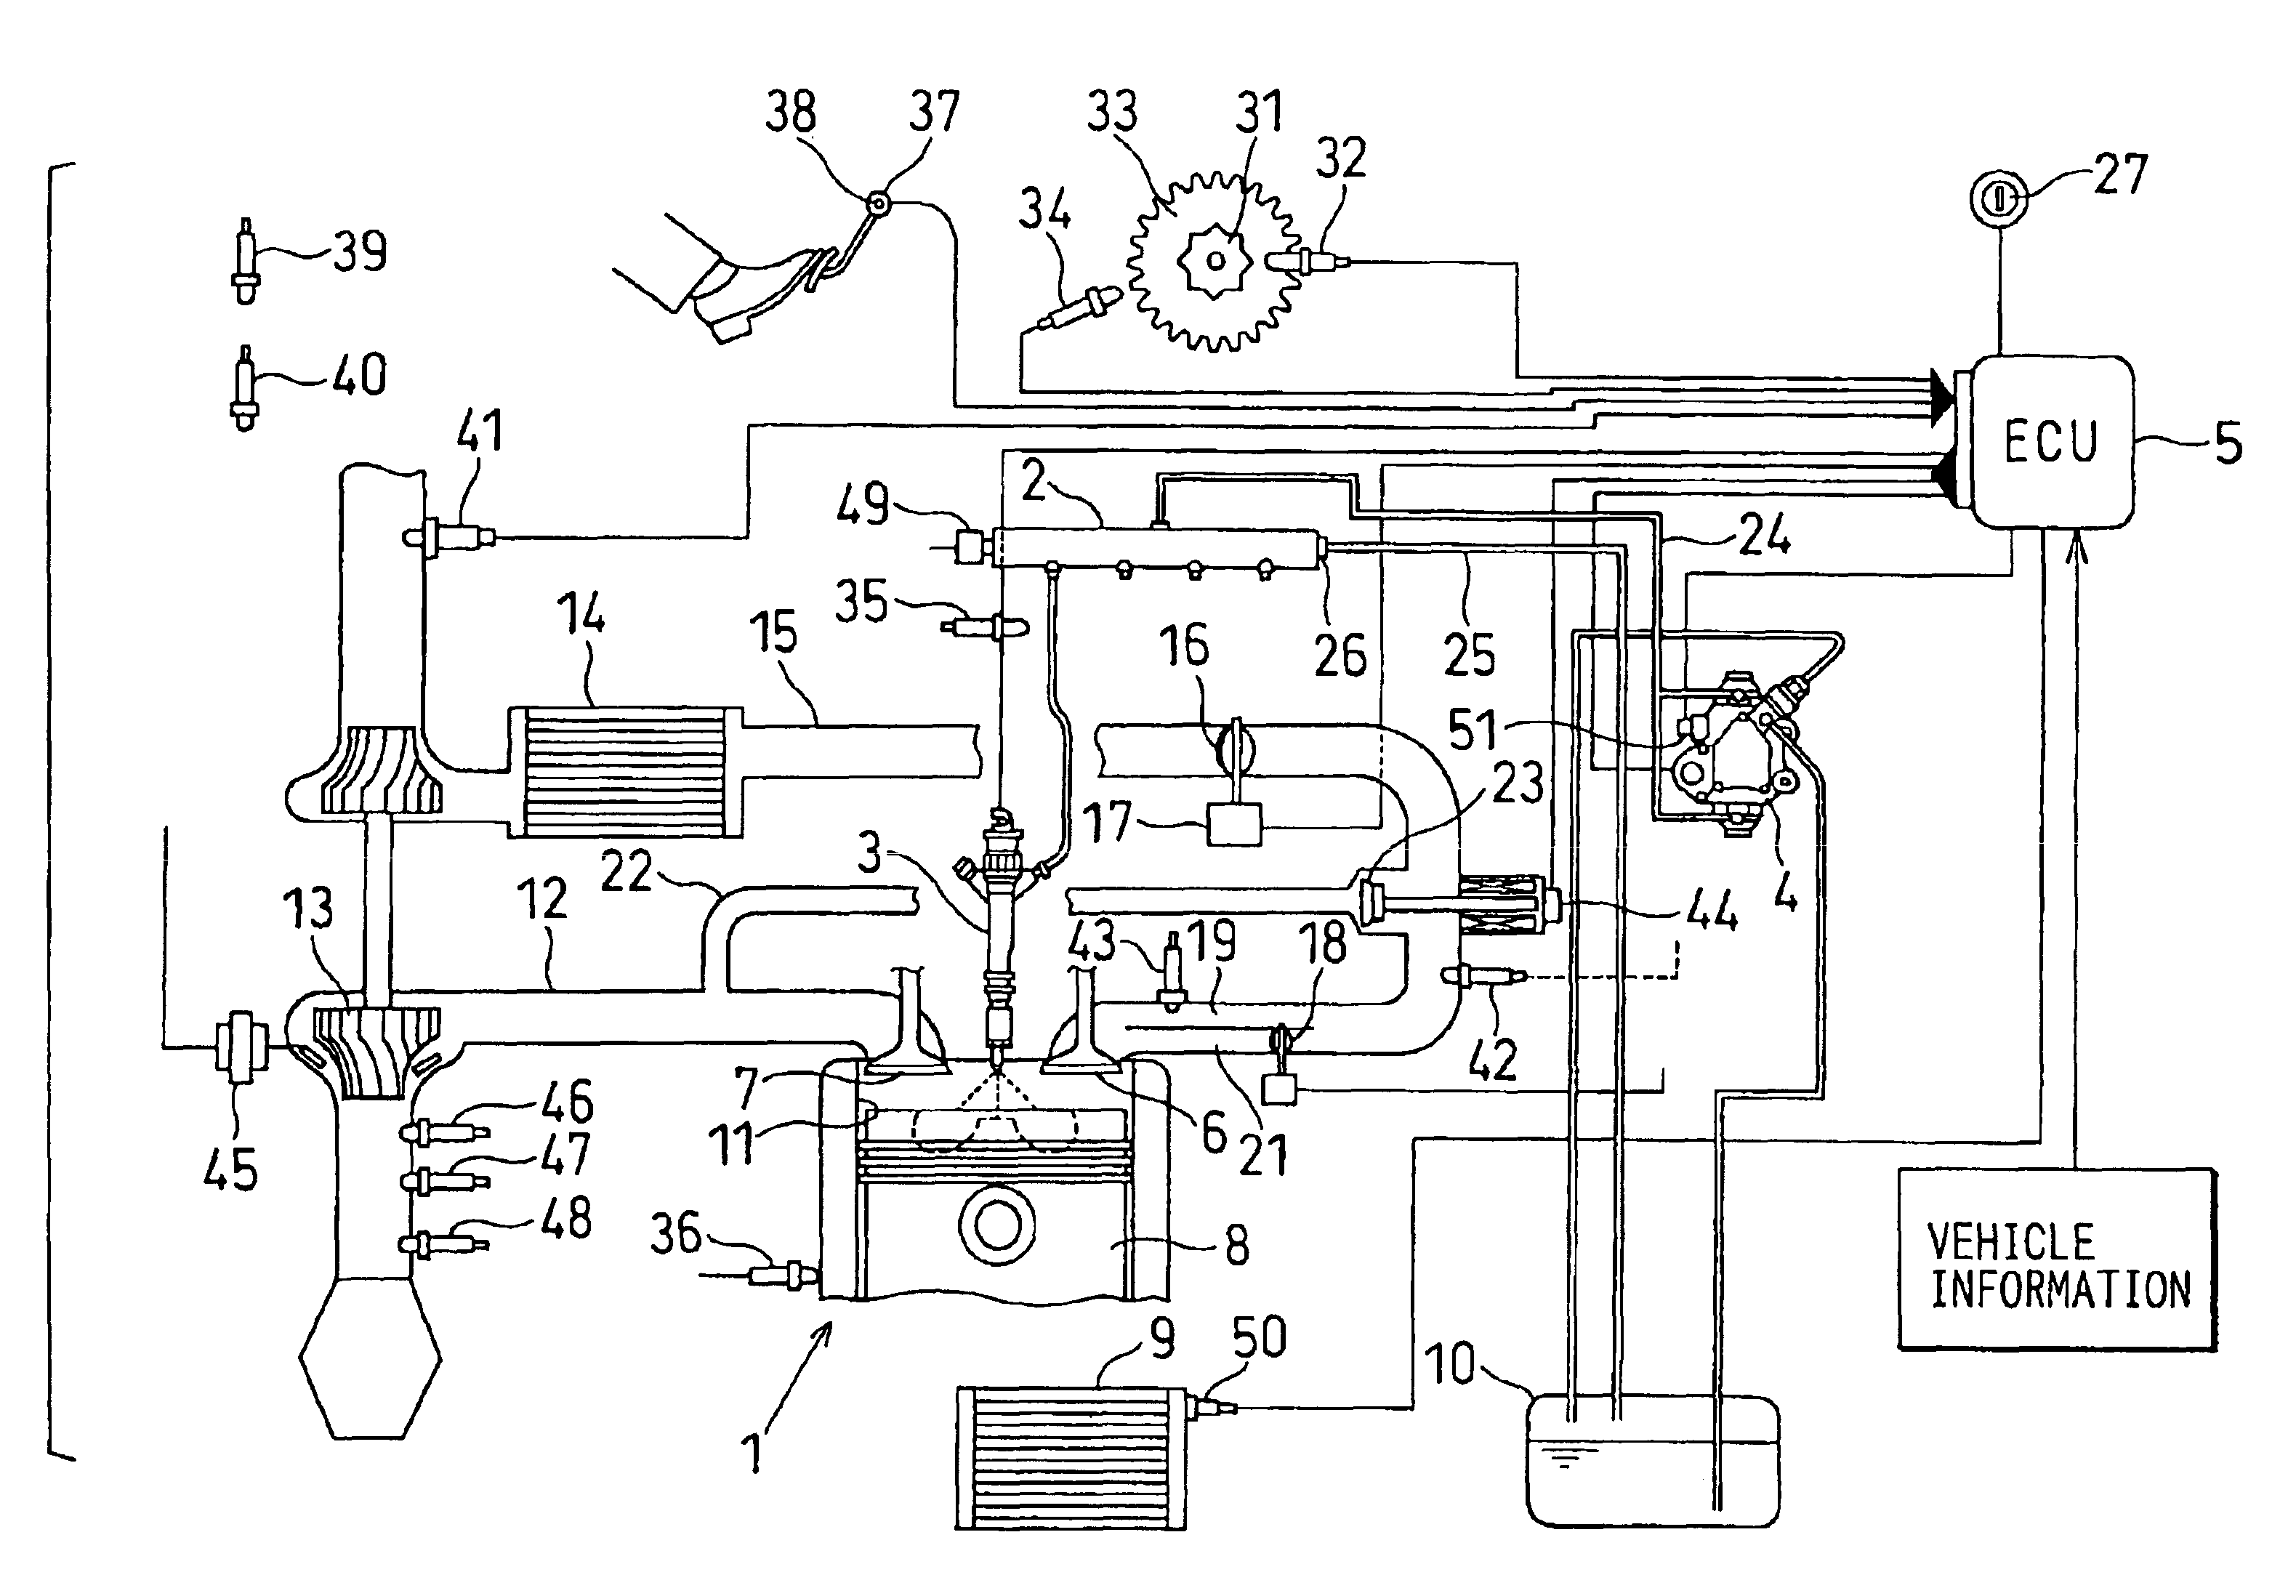 Accumulation type fuel injection system